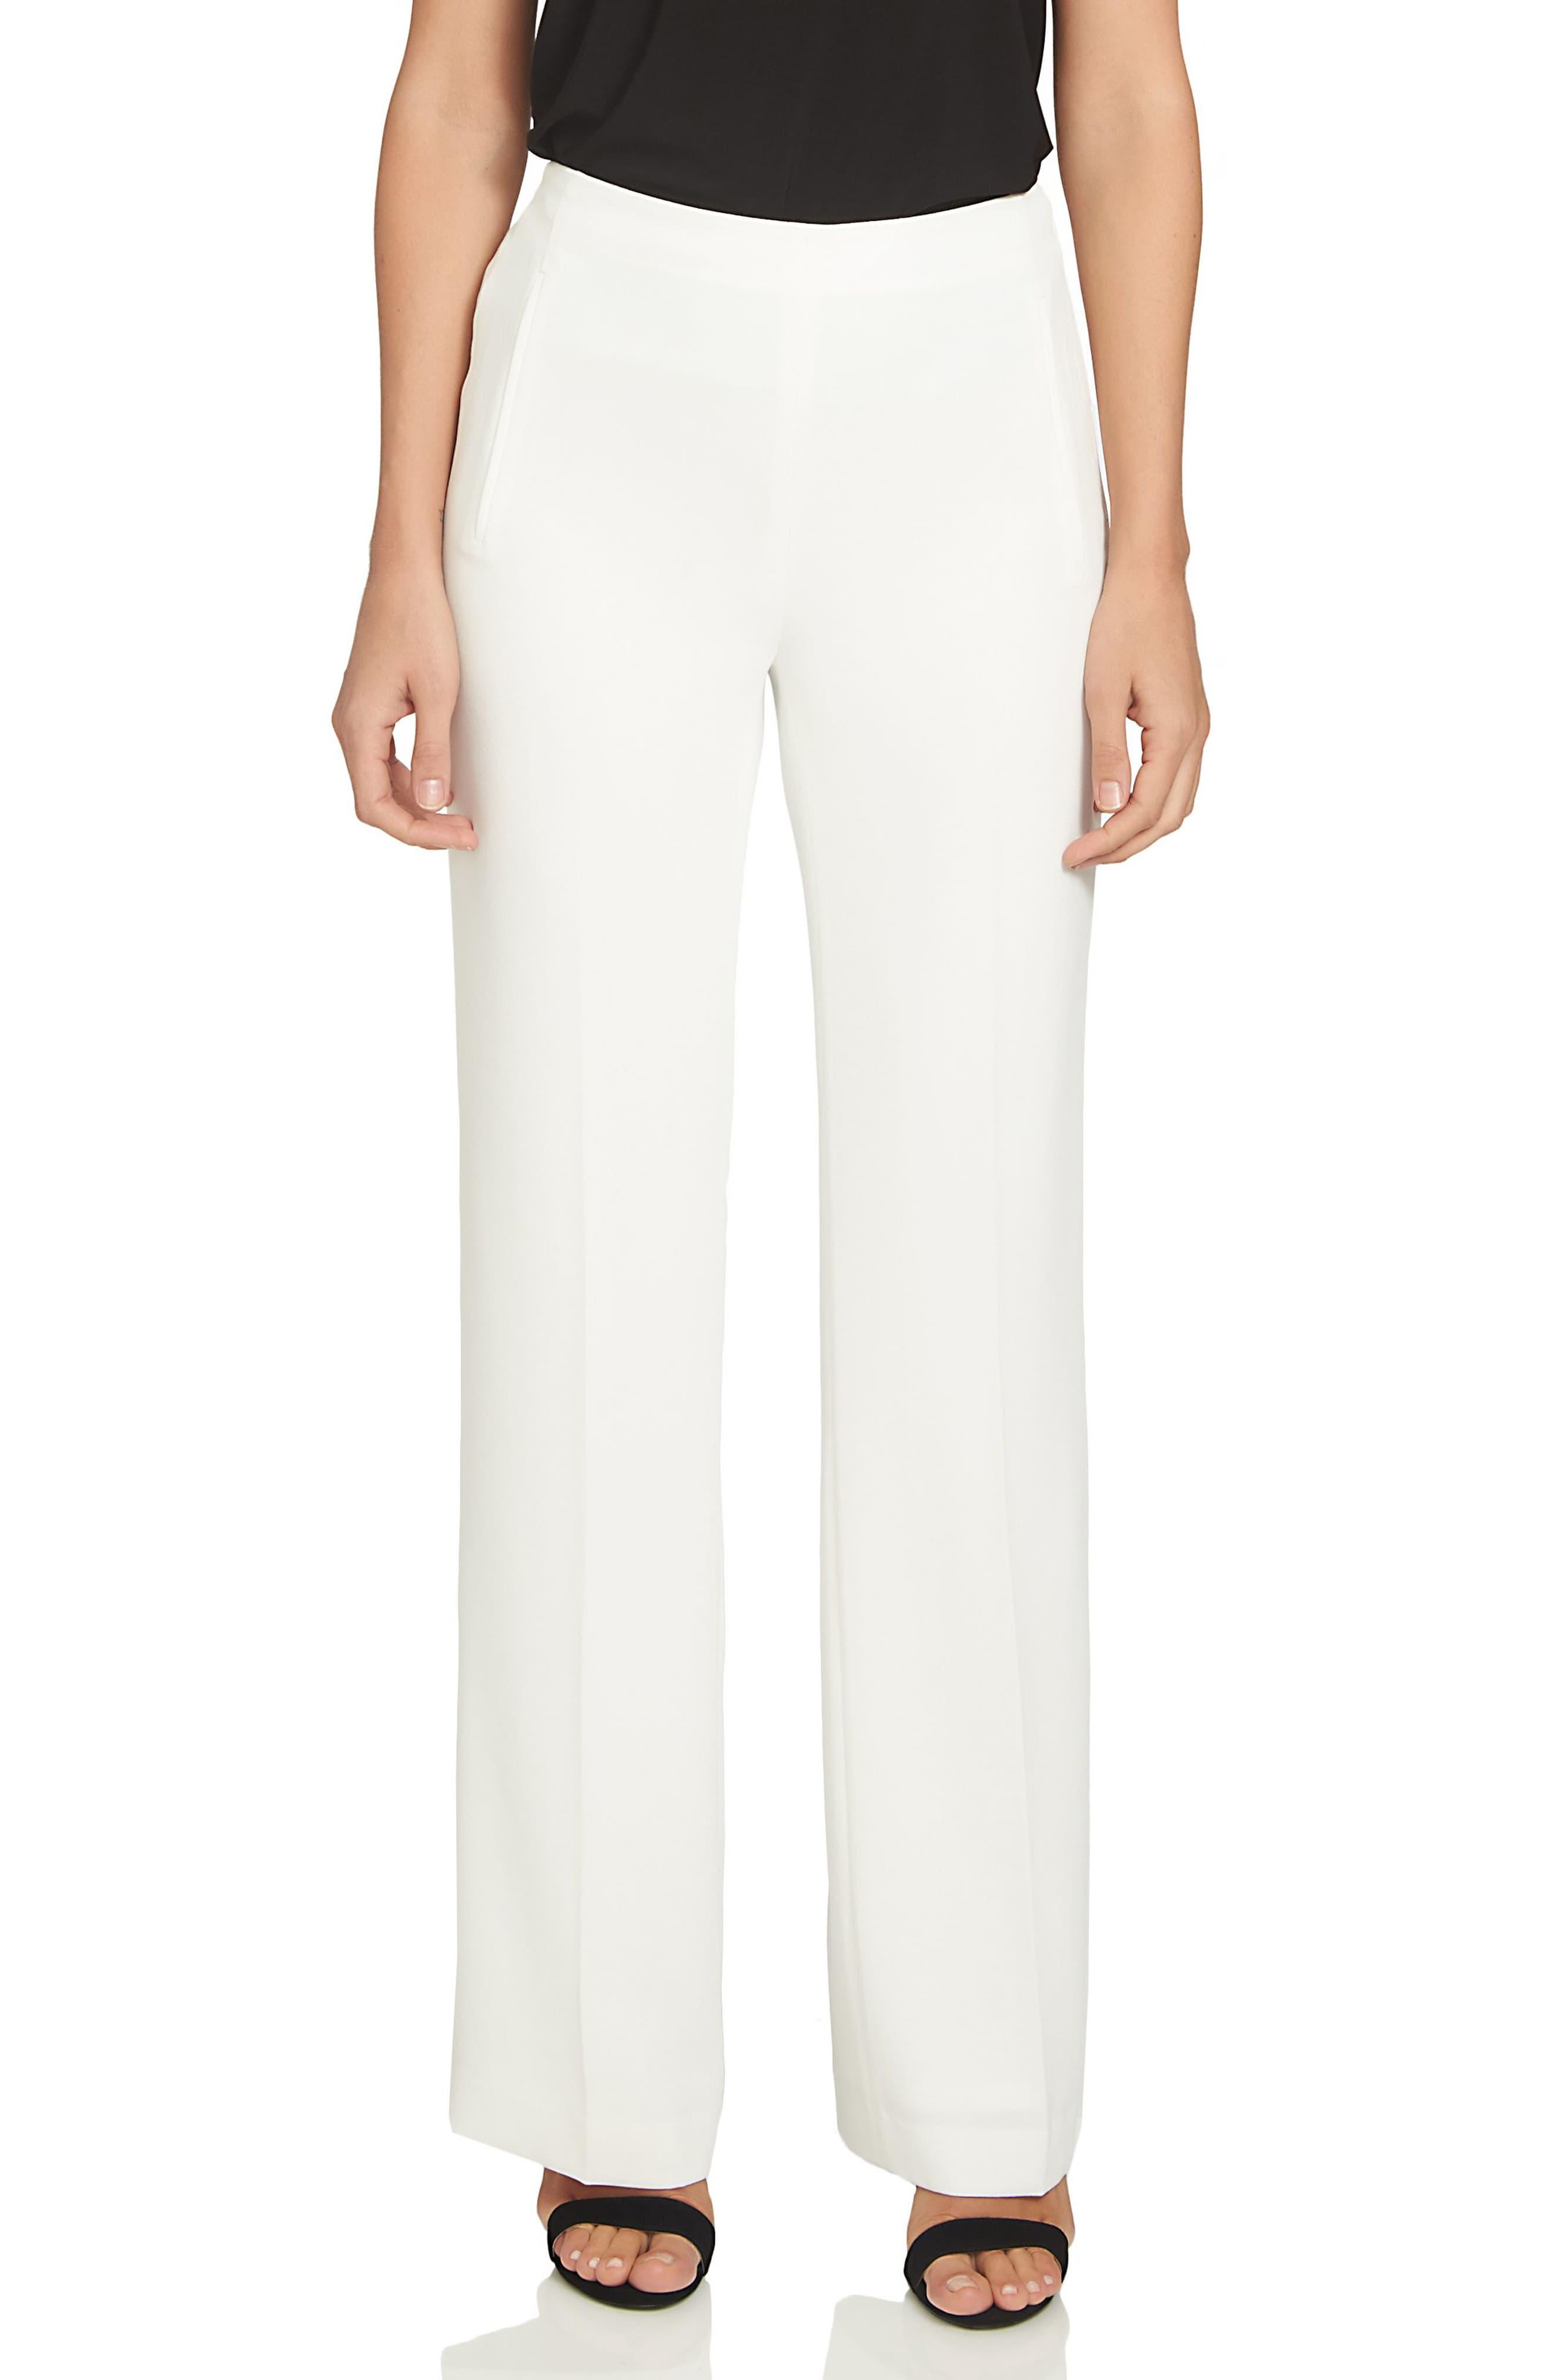 Cece Synthetic Pull-on Straight-leg Pants in White - Save 40% - Lyst